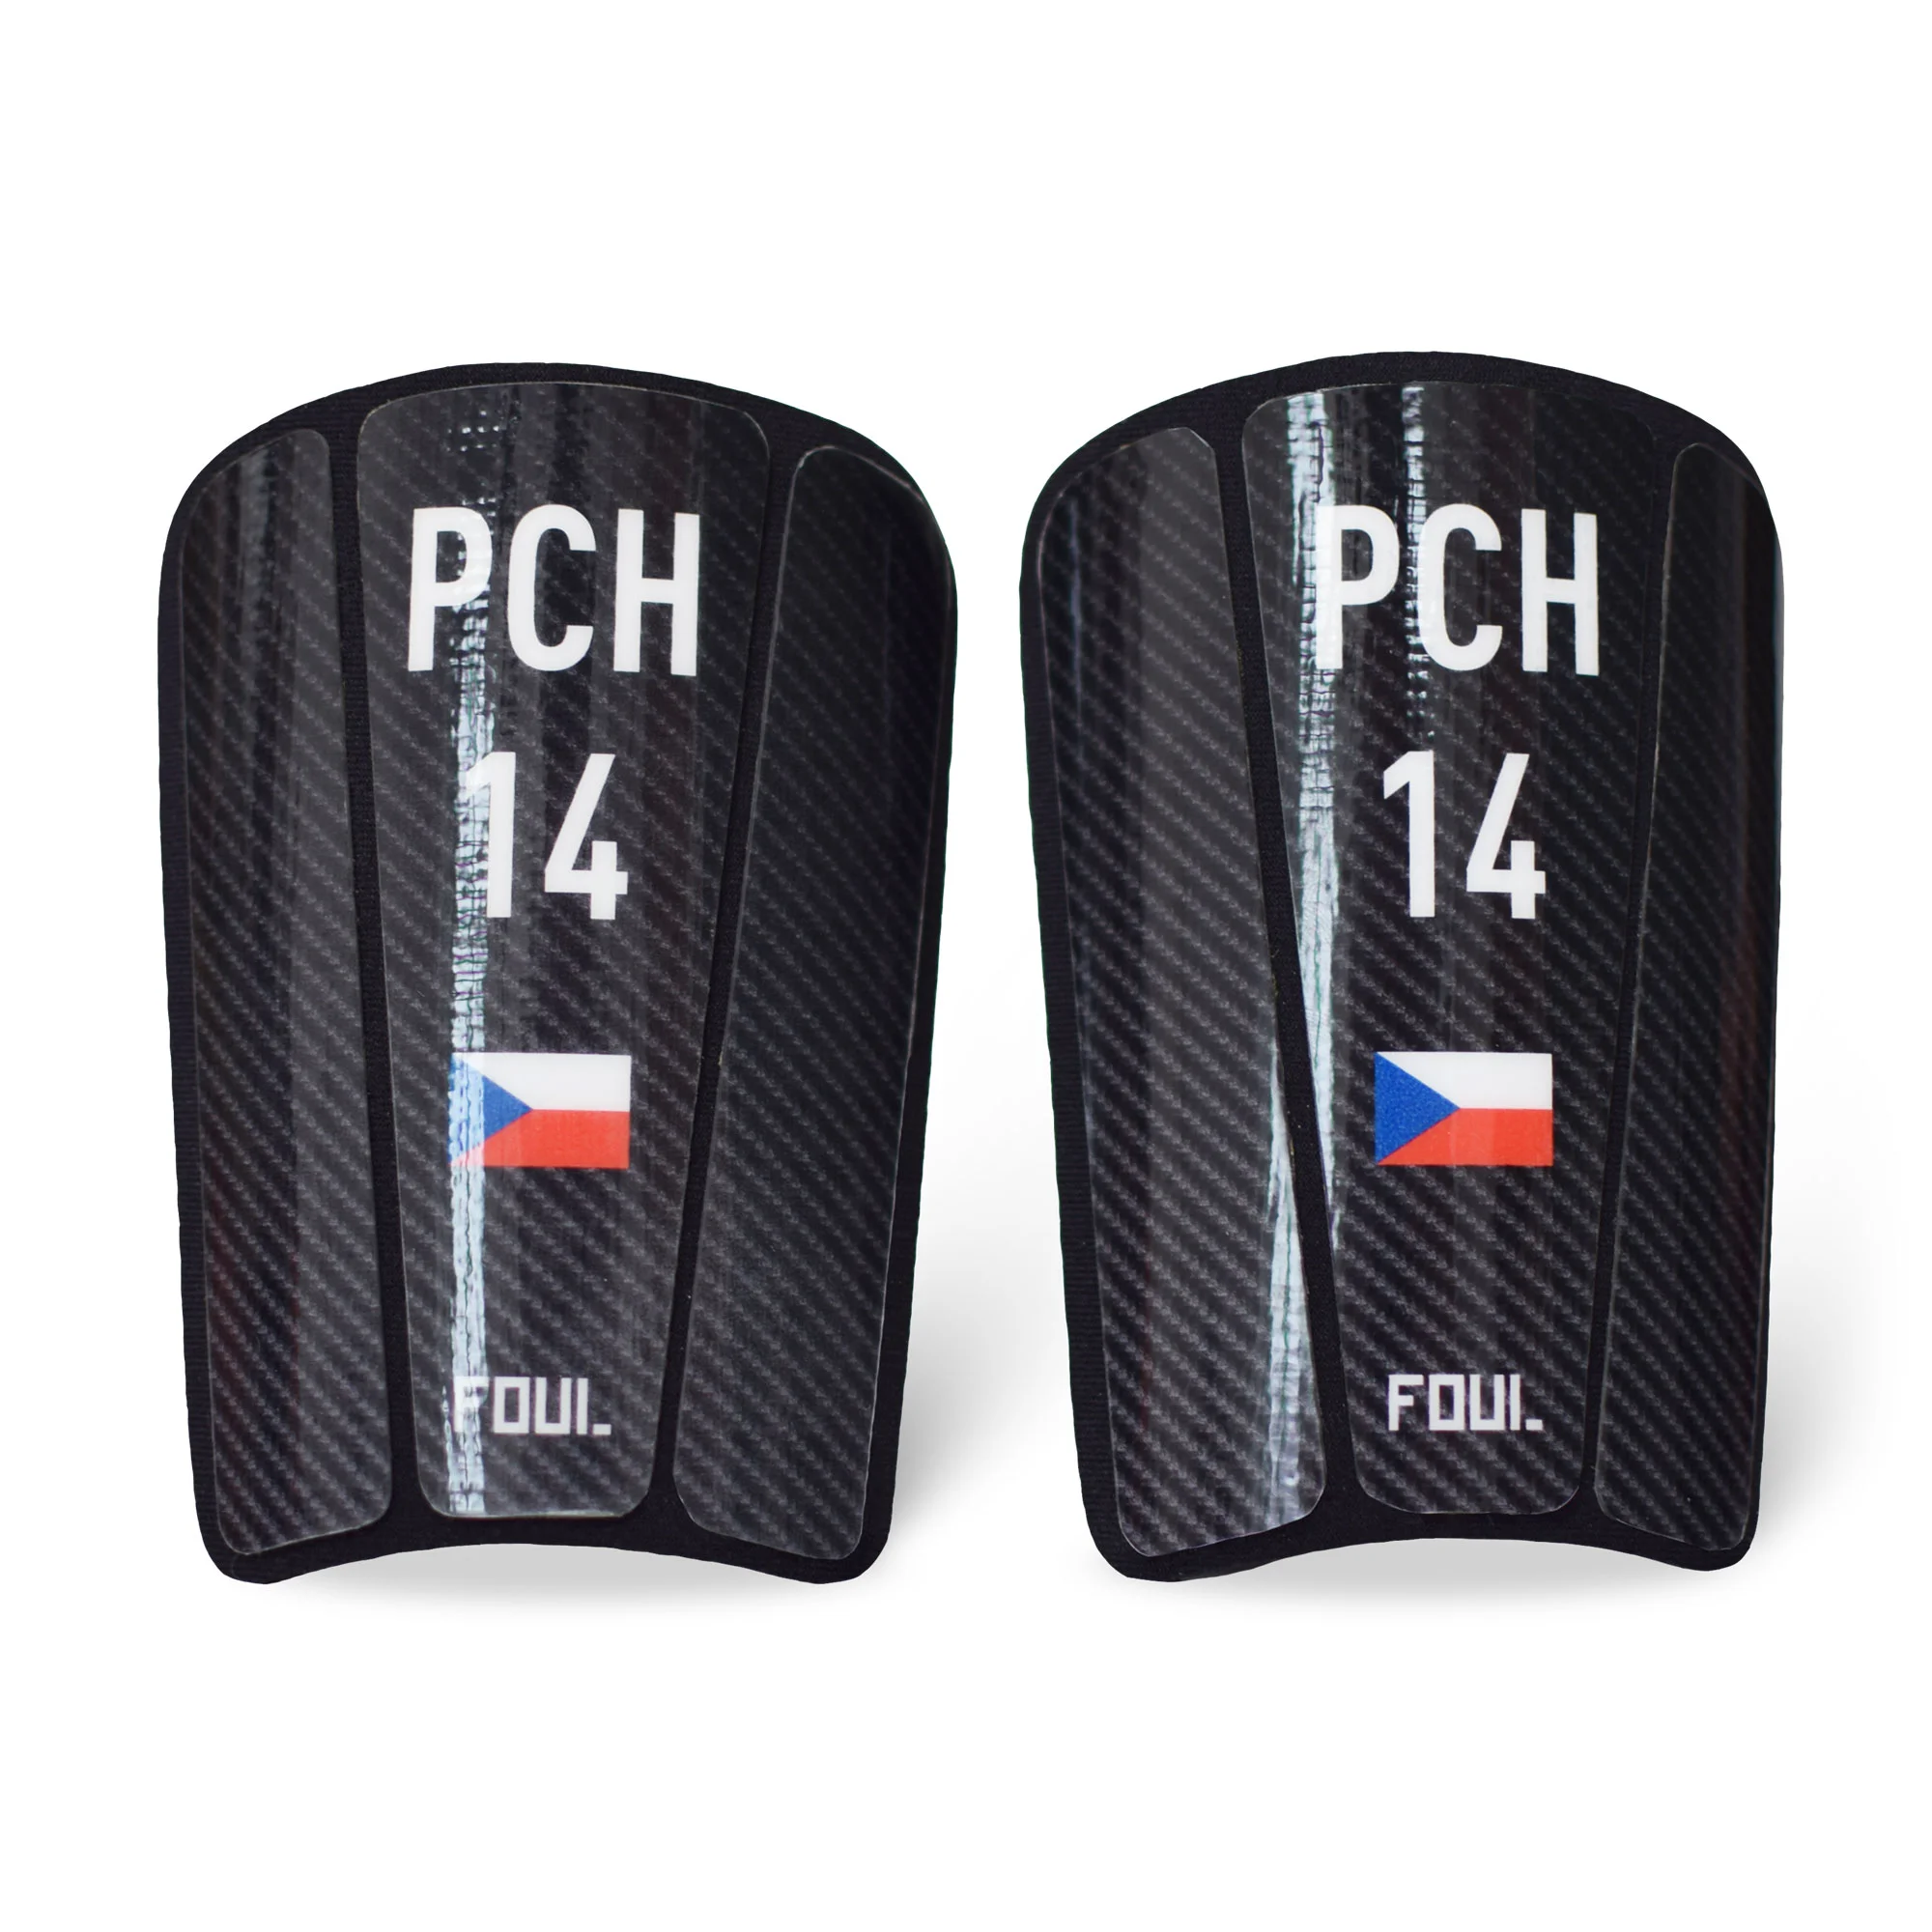 Carbon shin guards FOUL with ID(1)